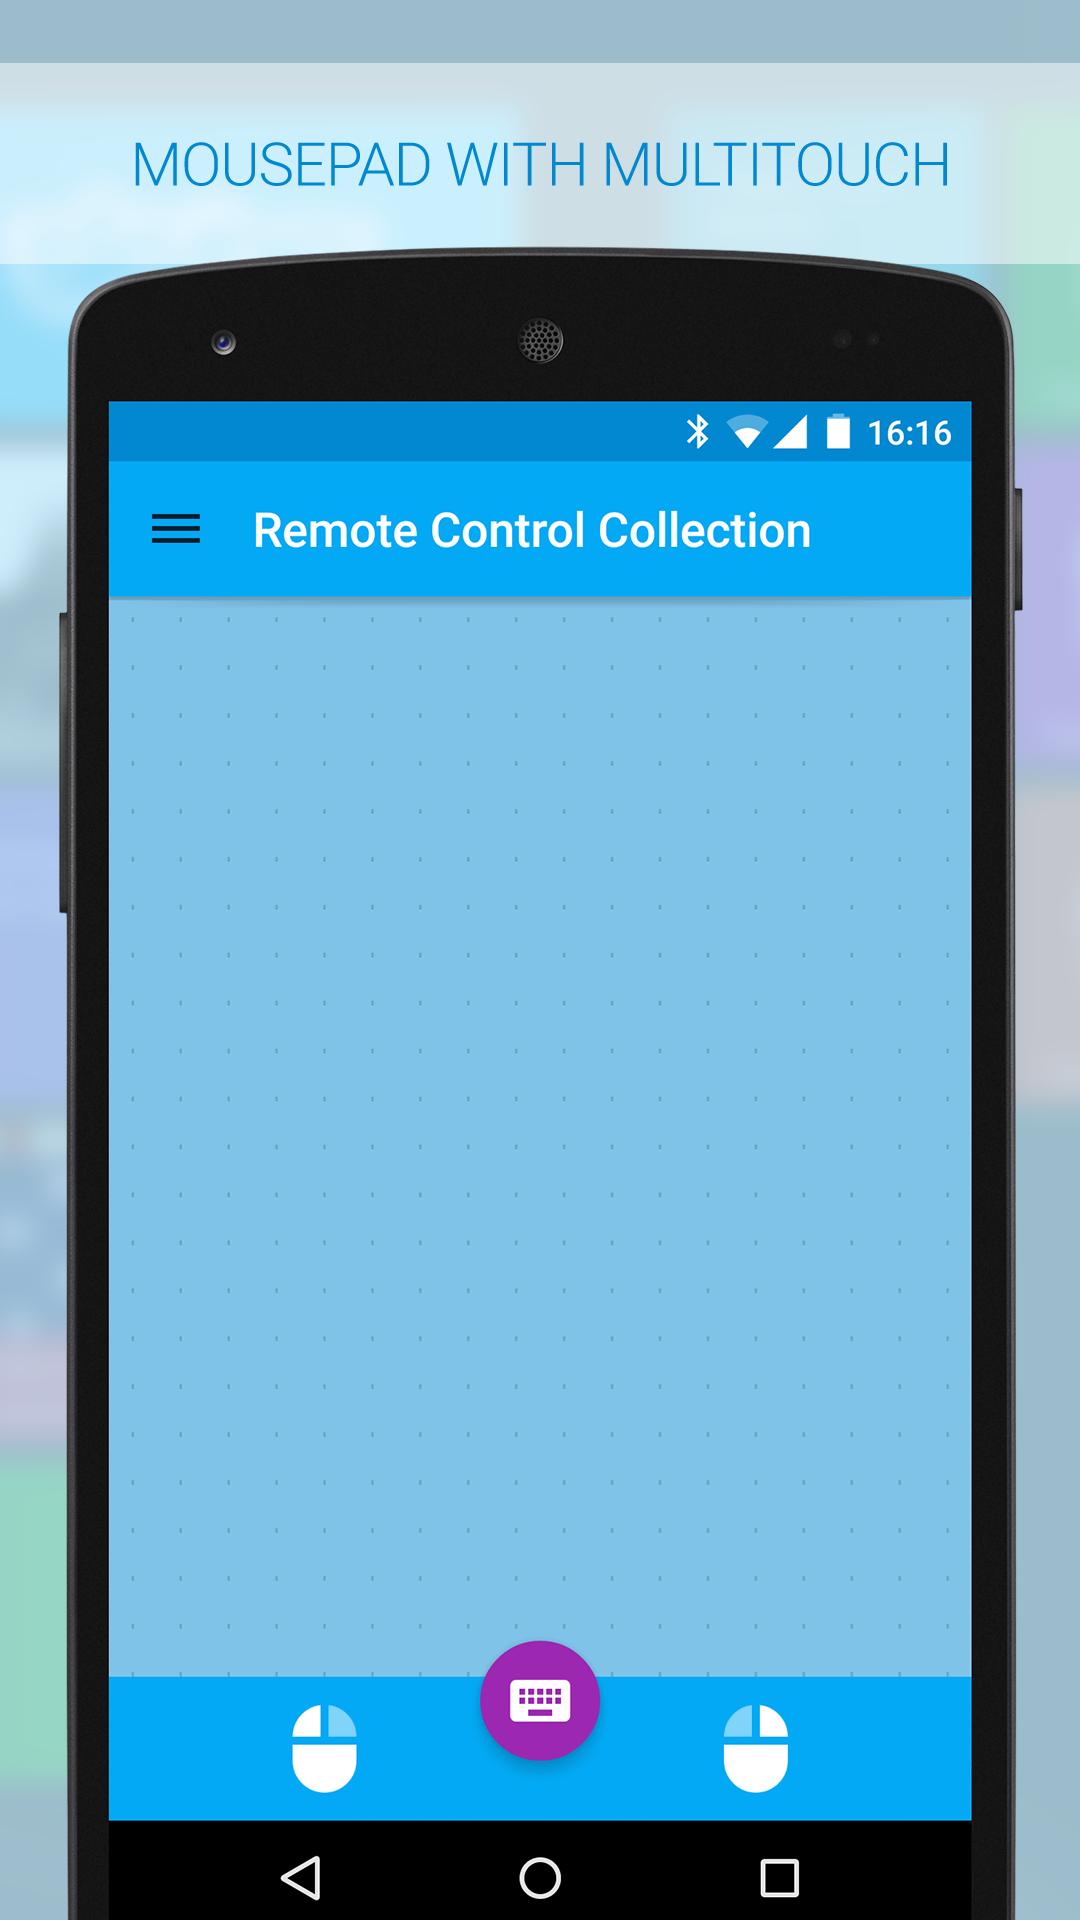 Remote collection. Remote Control collection. Control collection.